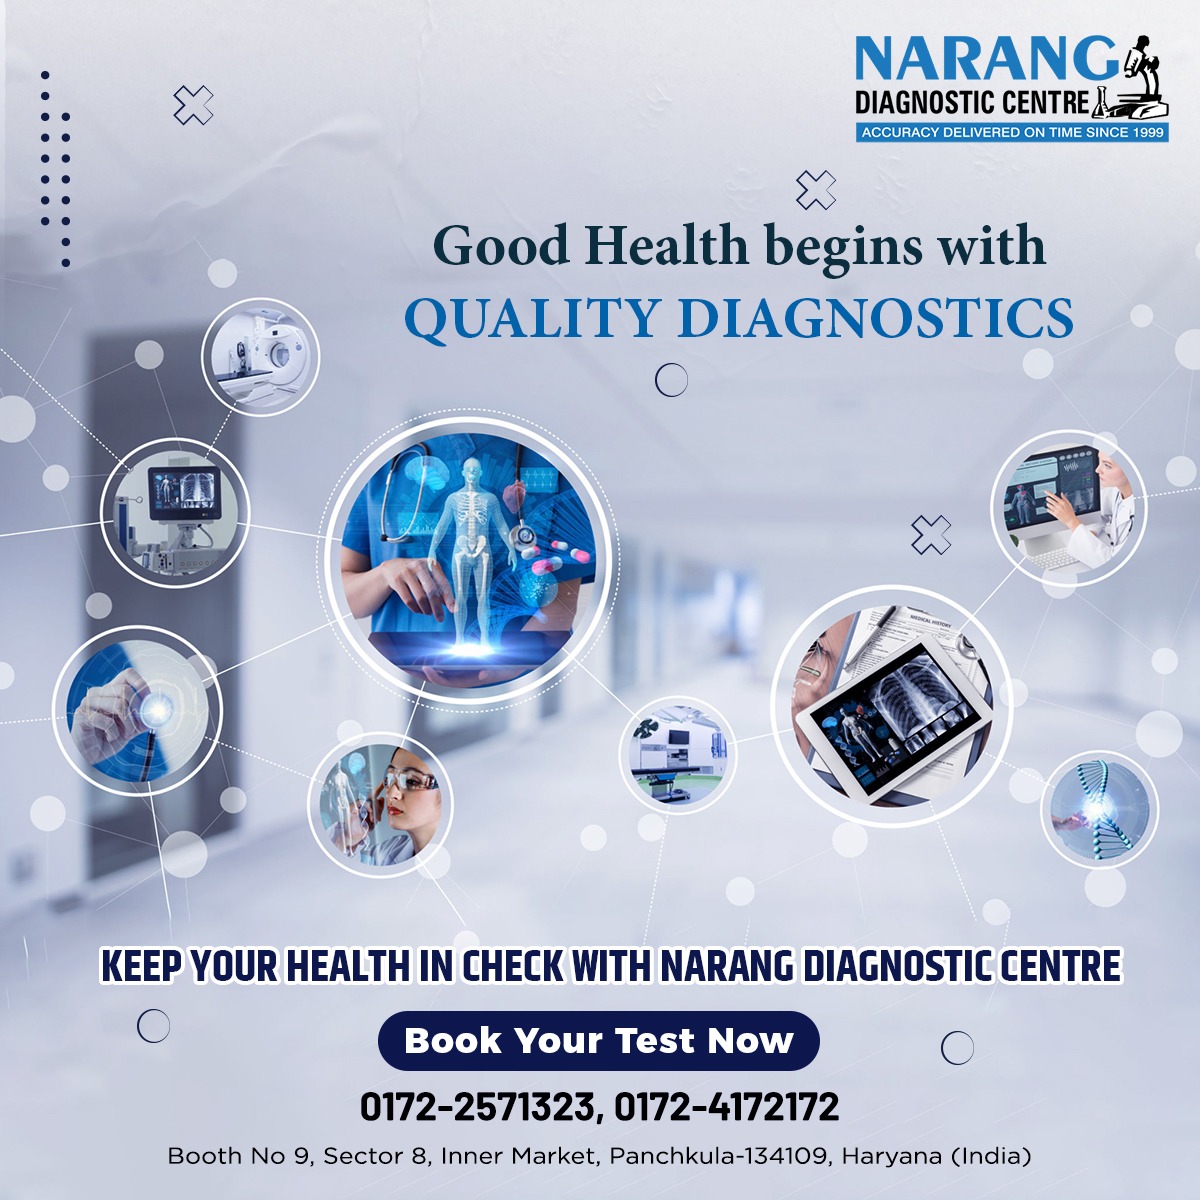 Good Health begins with Quality Diagnostics.  

 Keep your Health in check with 𝗡𝗮𝗿𝗮𝗻𝗴 𝗗𝗶𝗮𝗴𝗻𝗼𝘀𝘁𝗶𝗰 𝗖𝗲𝗻𝘁𝗿𝗲. 
Book your Health Check-up - 0172-2571323 or 0172-4172172

#Qualitydiagnostics #Healthcheckup #Healthpackage #Diagnosticcentre #Trusteddiagnosticcentre